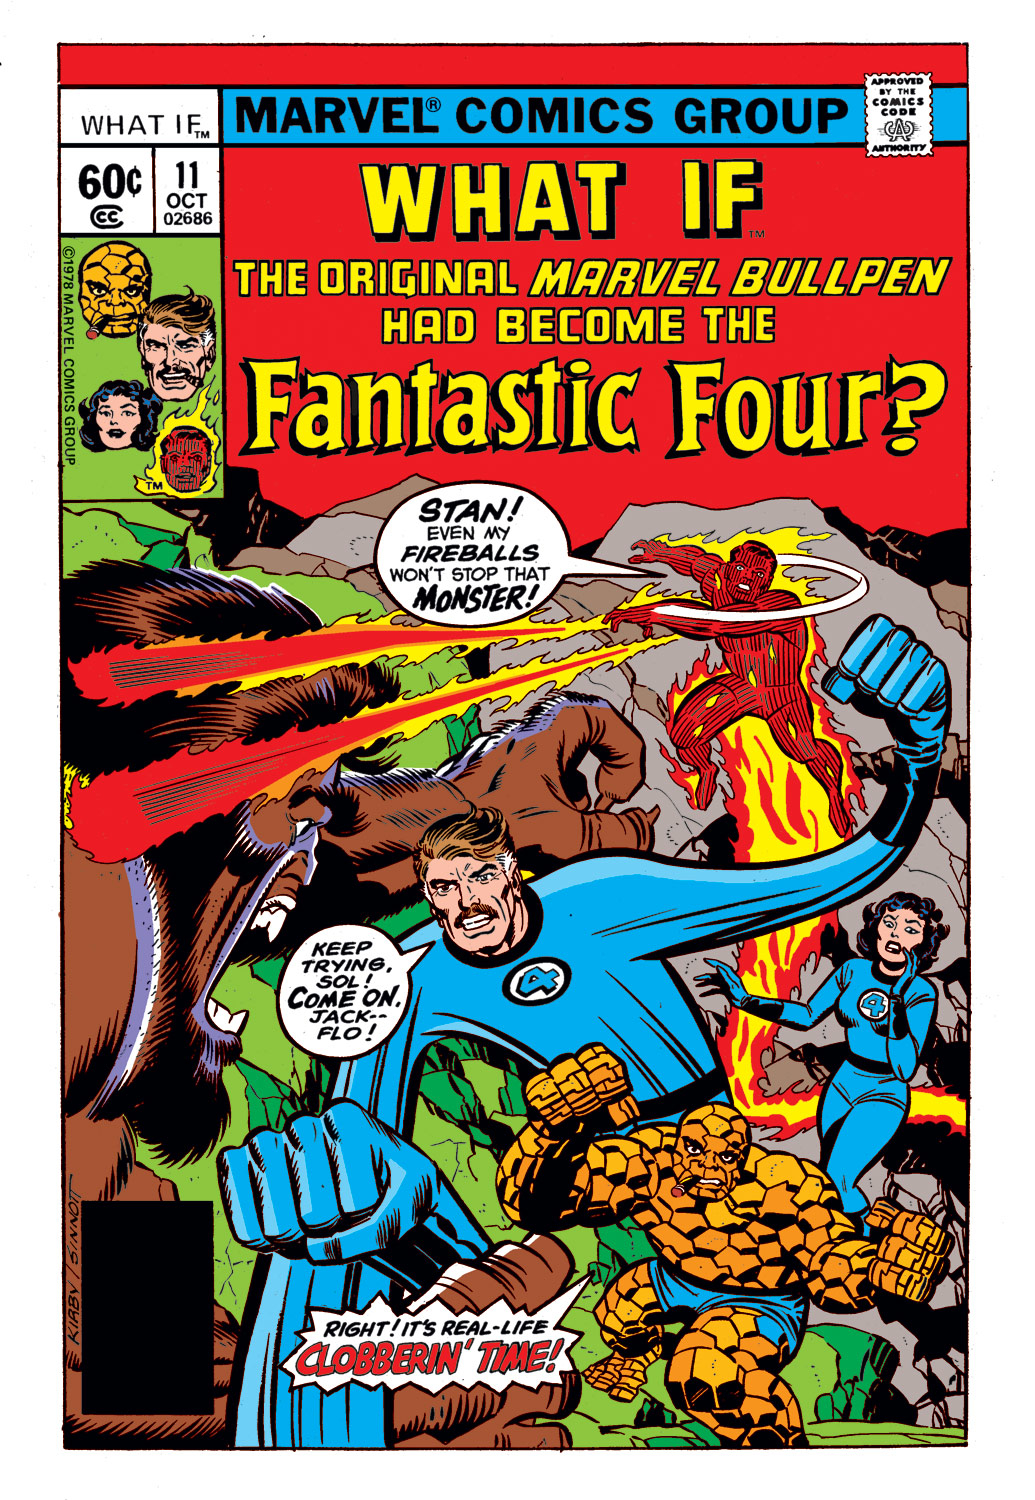 Read online What If? (1977) comic -  Issue #11 - The original marvel bullpen had become the Fantastic Four - 1